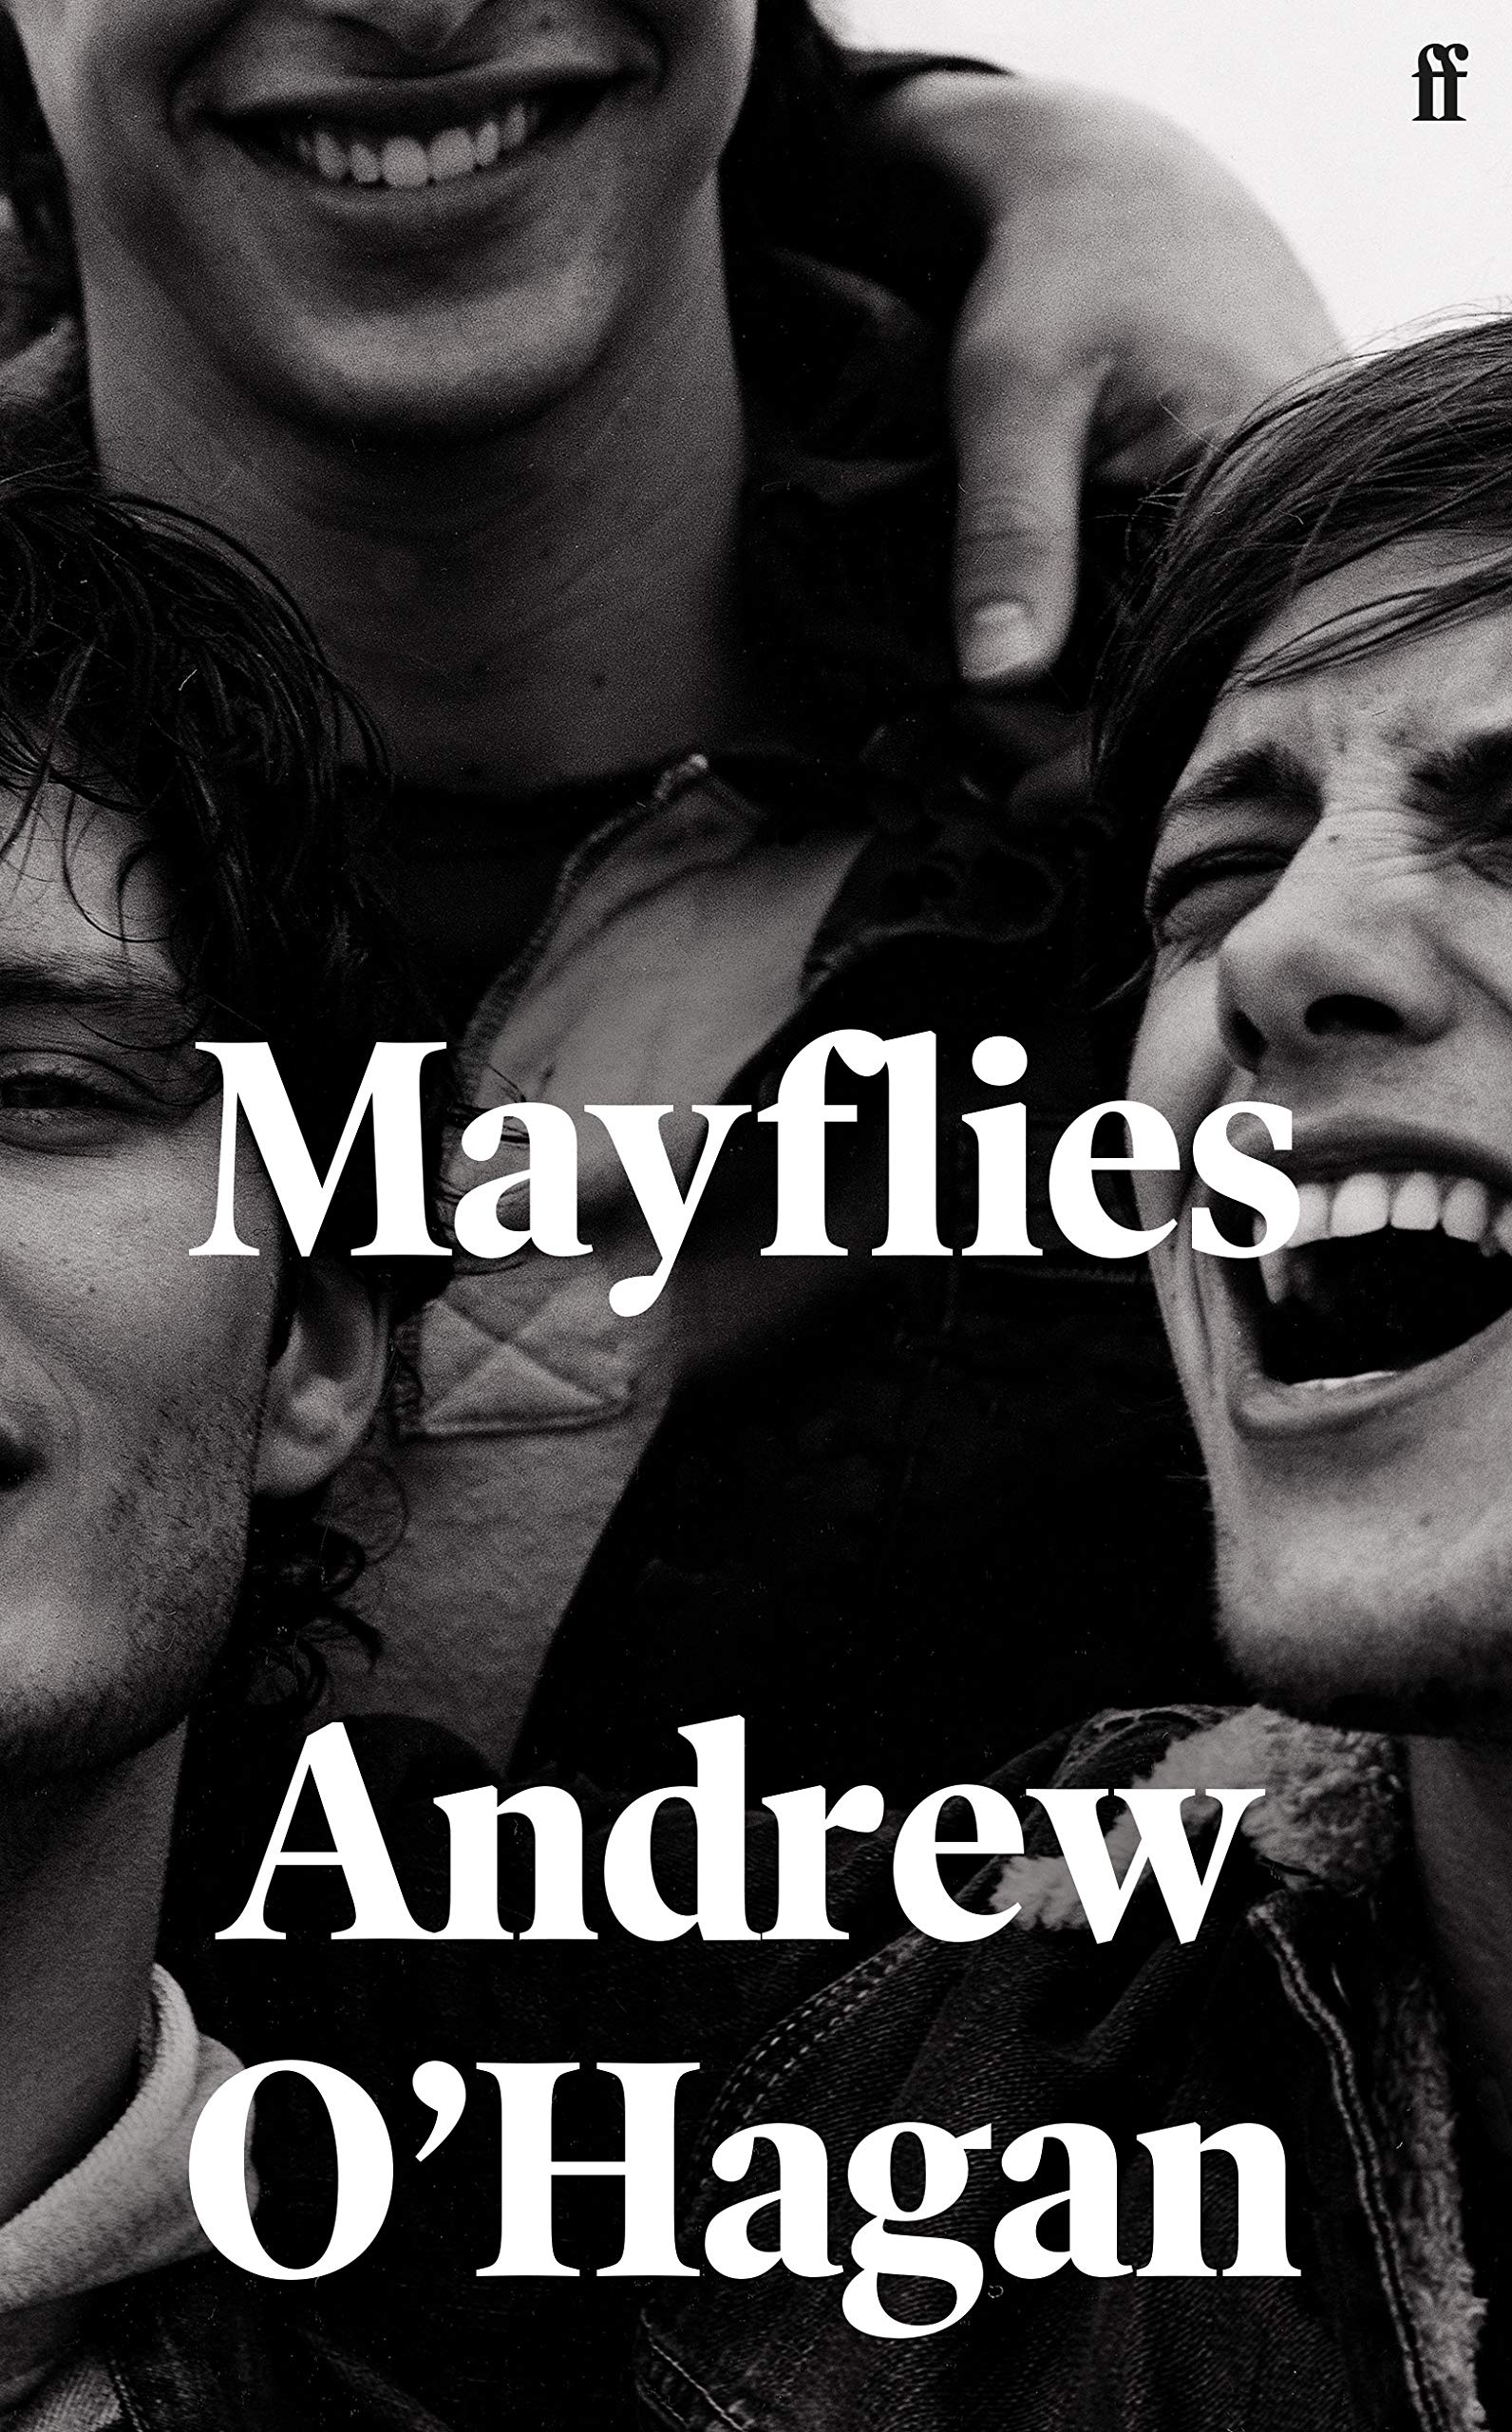 Mayflies by Andrew O'Hagan book cover